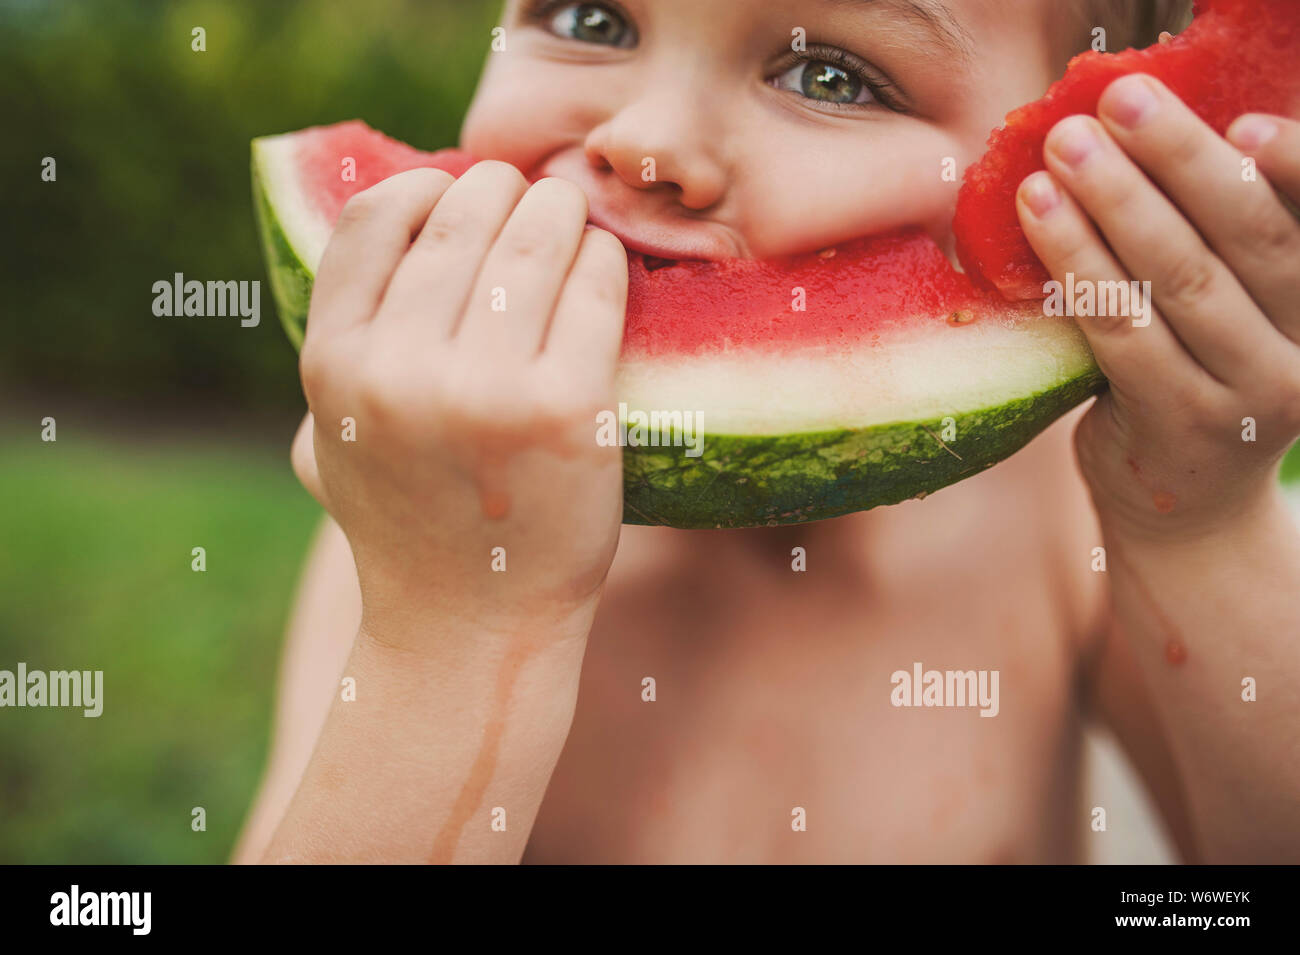 A young child is taking a bite out of a big slice of watermelon and looking directly into the camera. Stock Photo